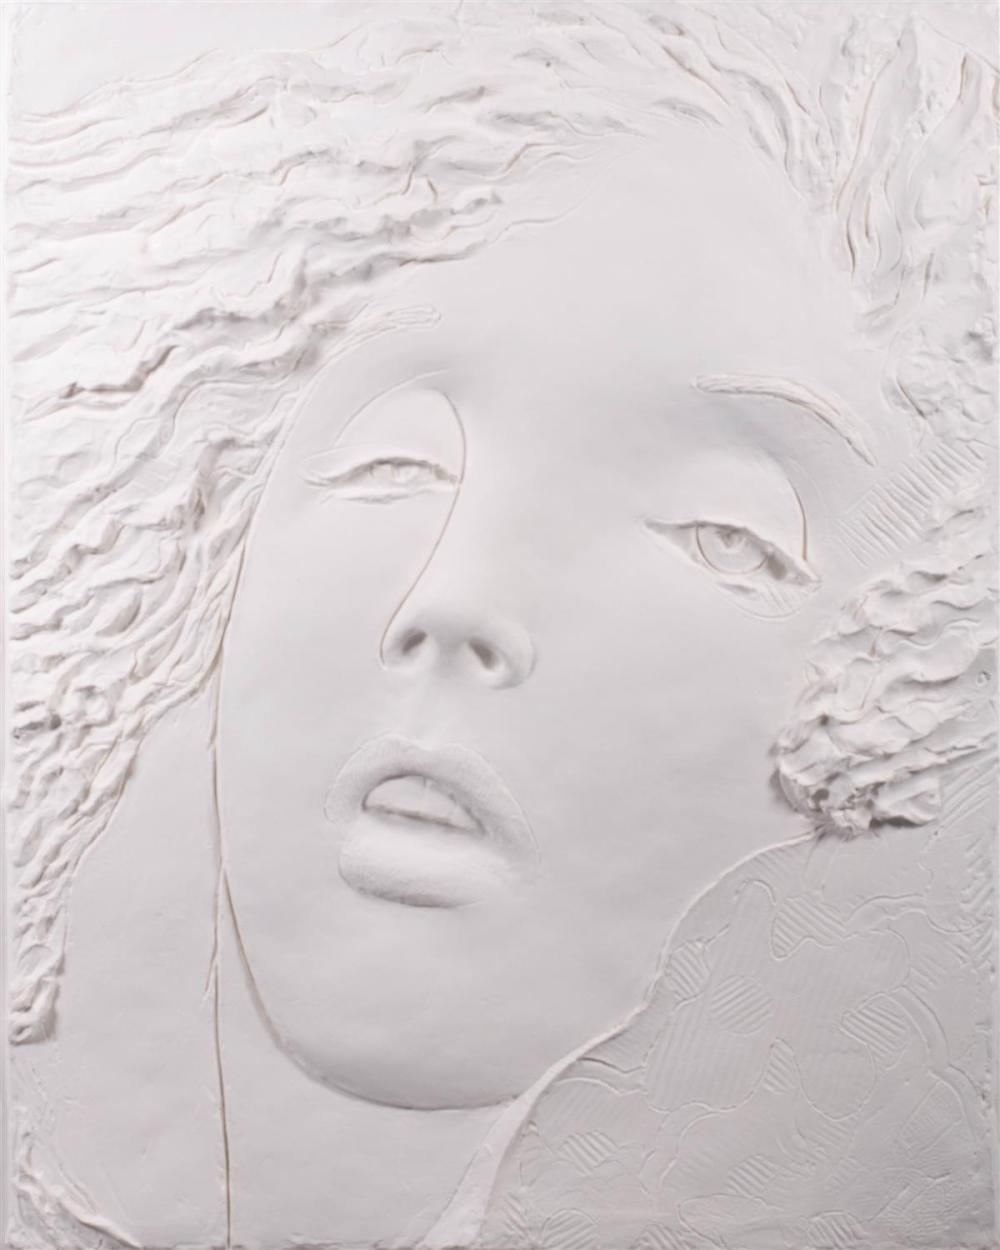 UNTITLED WOMAN S FACE PRESSED 33c971